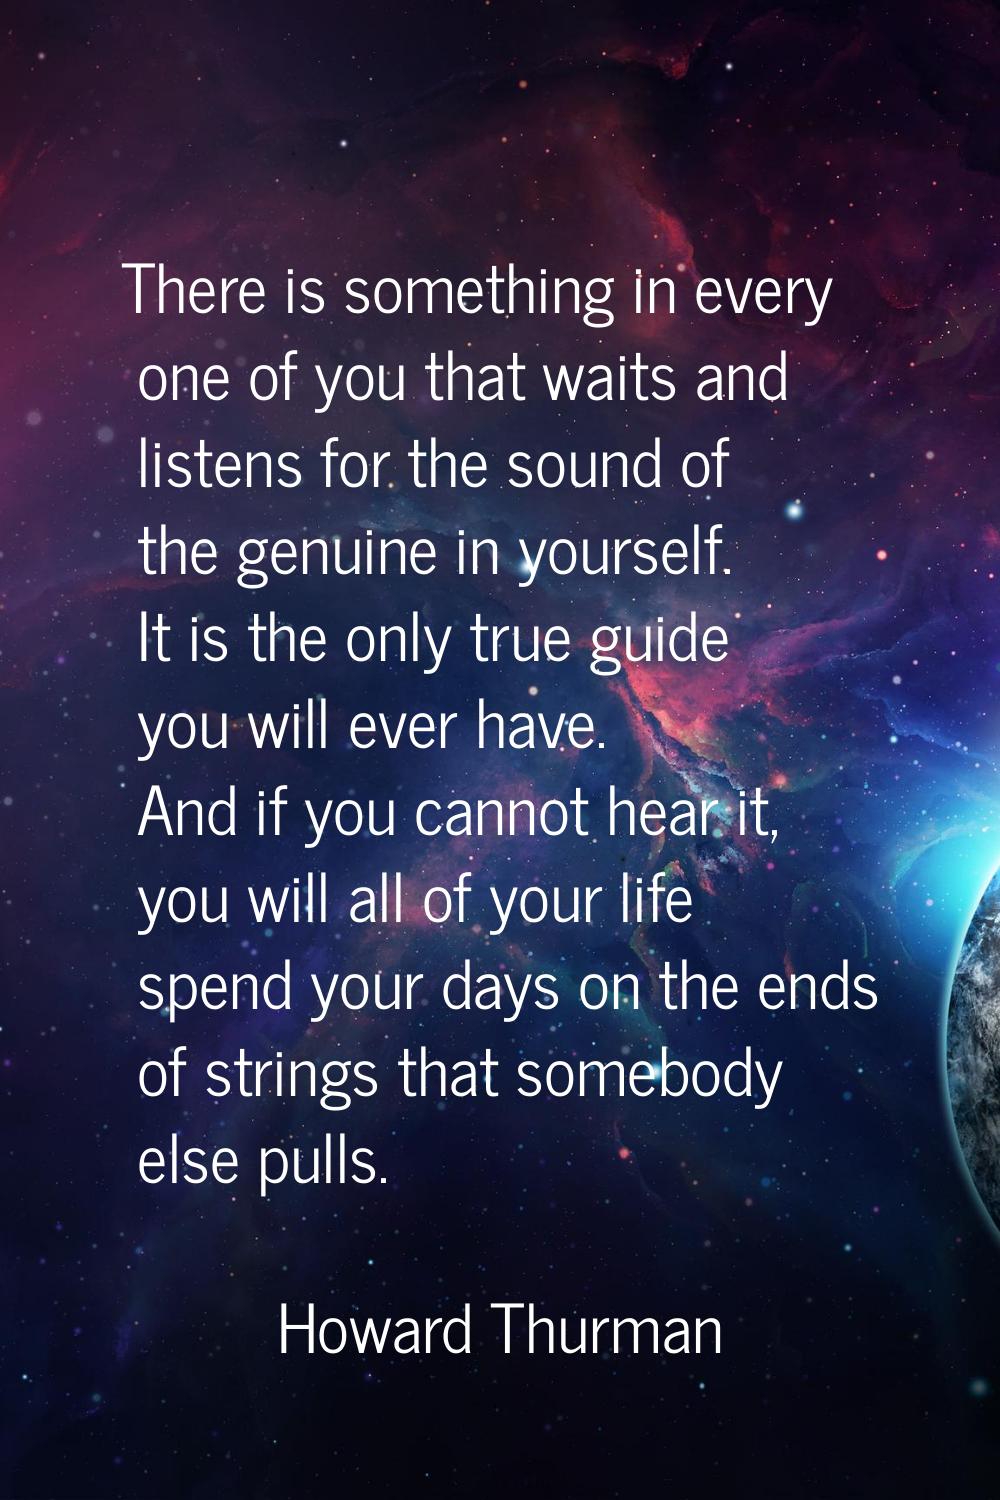 There is something in every one of you that waits and listens for the sound of the genuine in yours